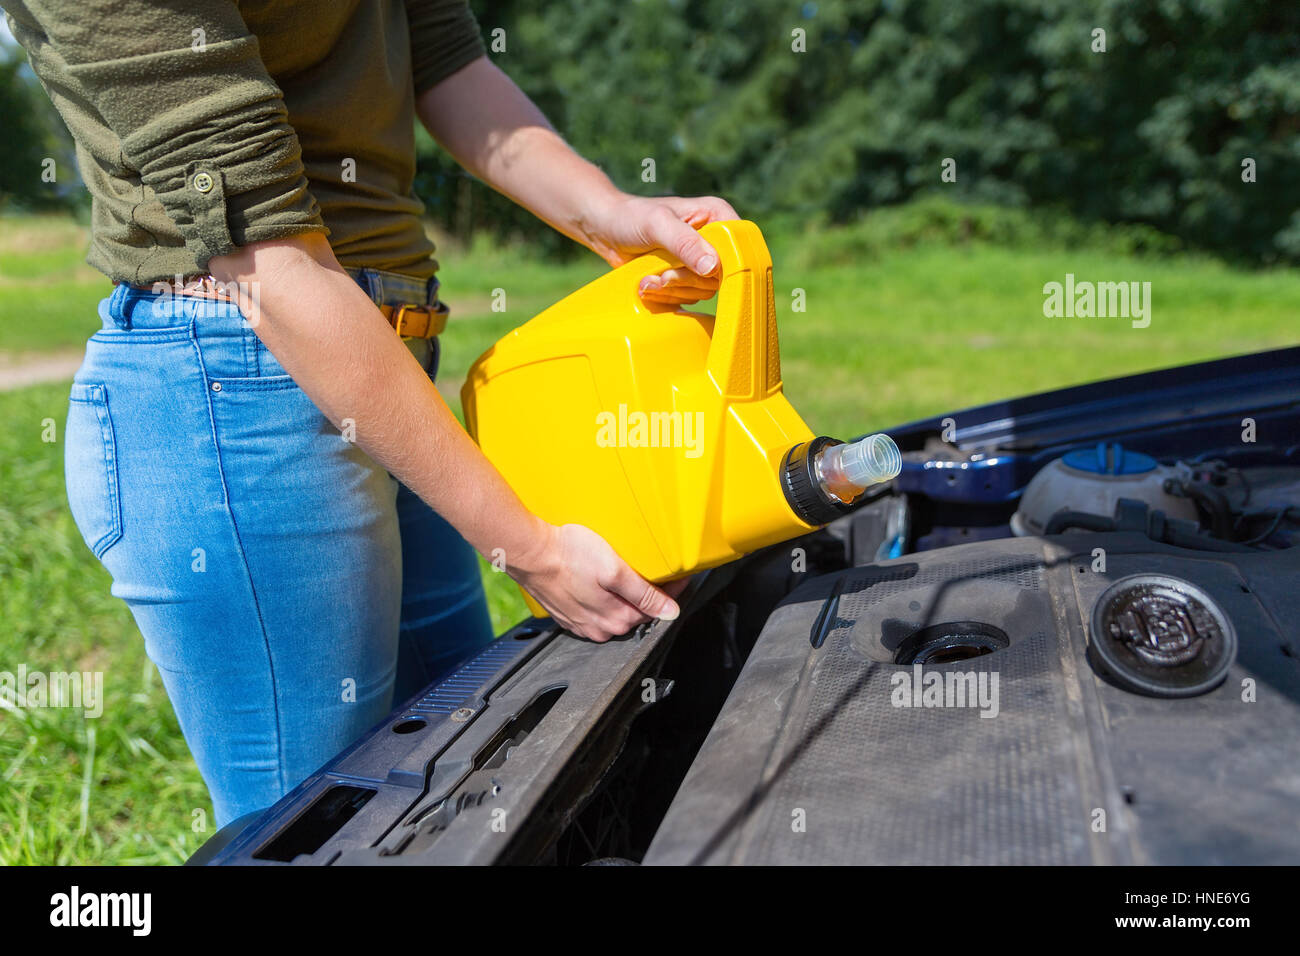 Young caucasian woman filling car motor with oil in yellow jerrycan Stock Photo